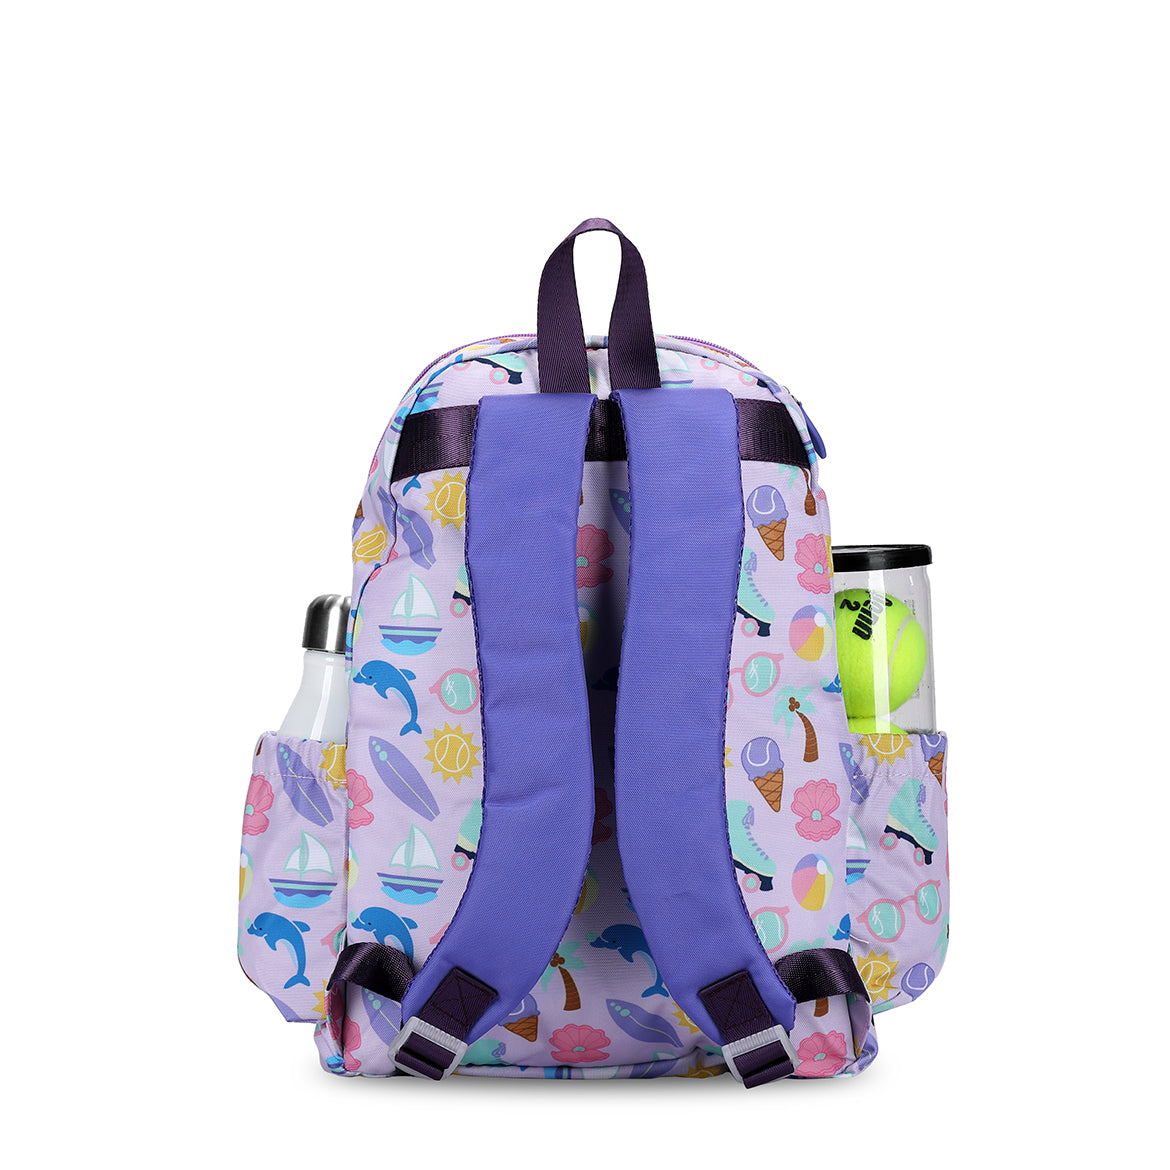 Back view of purple kids tennis backpack. Backpack is covered in beach themed icons such as surfboard, boats, beach ball and palm trees.